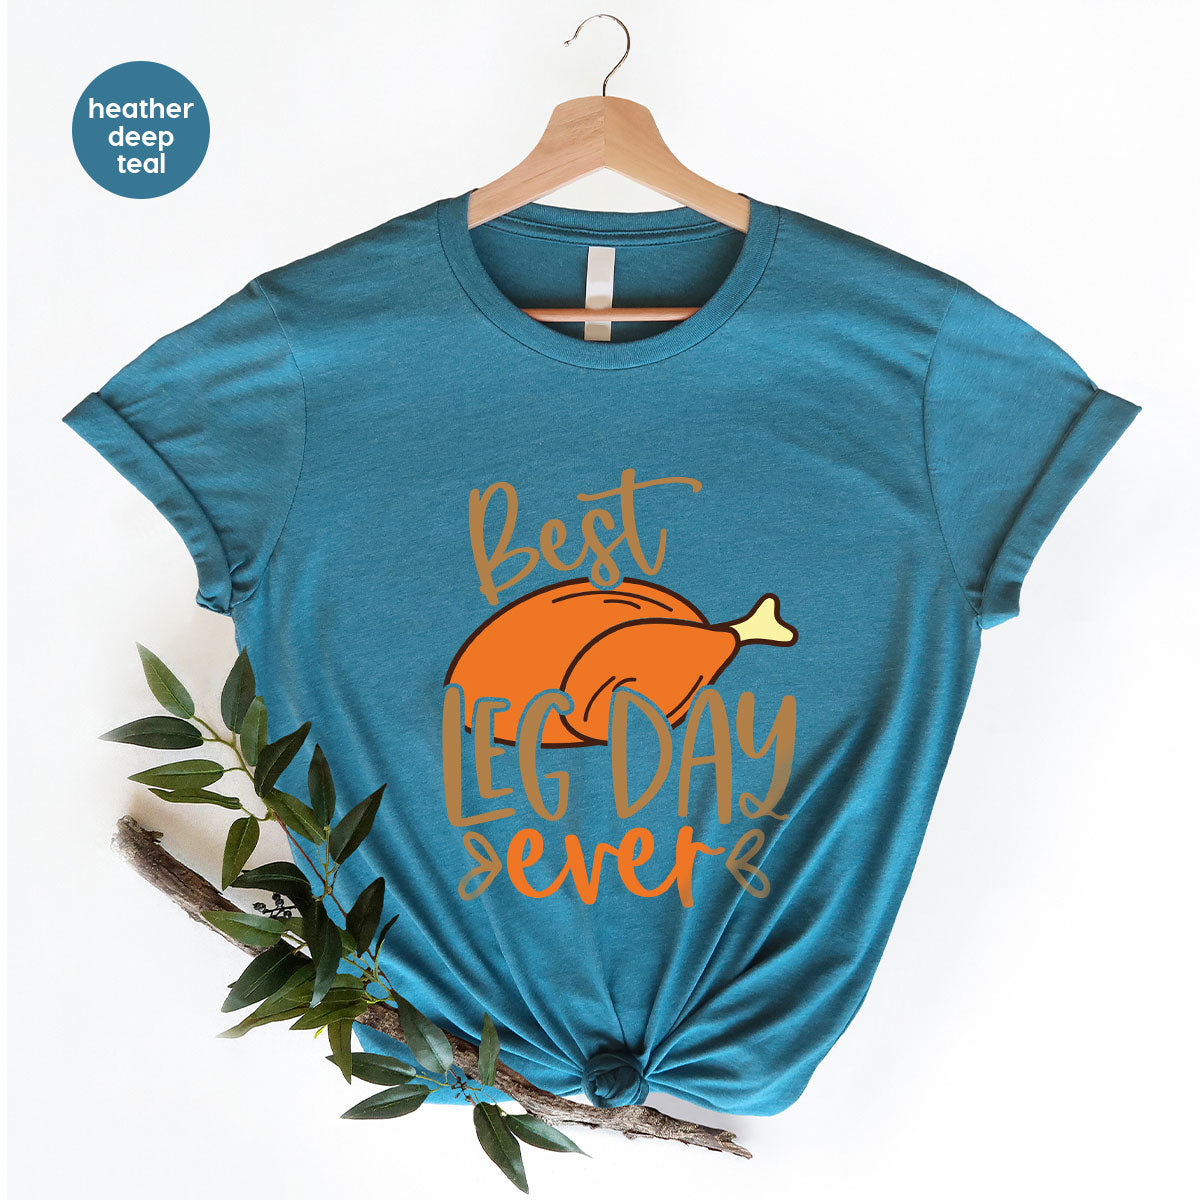 Funny Thanksgiving Shirts, Turkey Graphic Tees, Fall Crewneck Sweatshirt, Autumn Outfit, Matching Family TShirts, Best Leg Day Ever T-Shirt